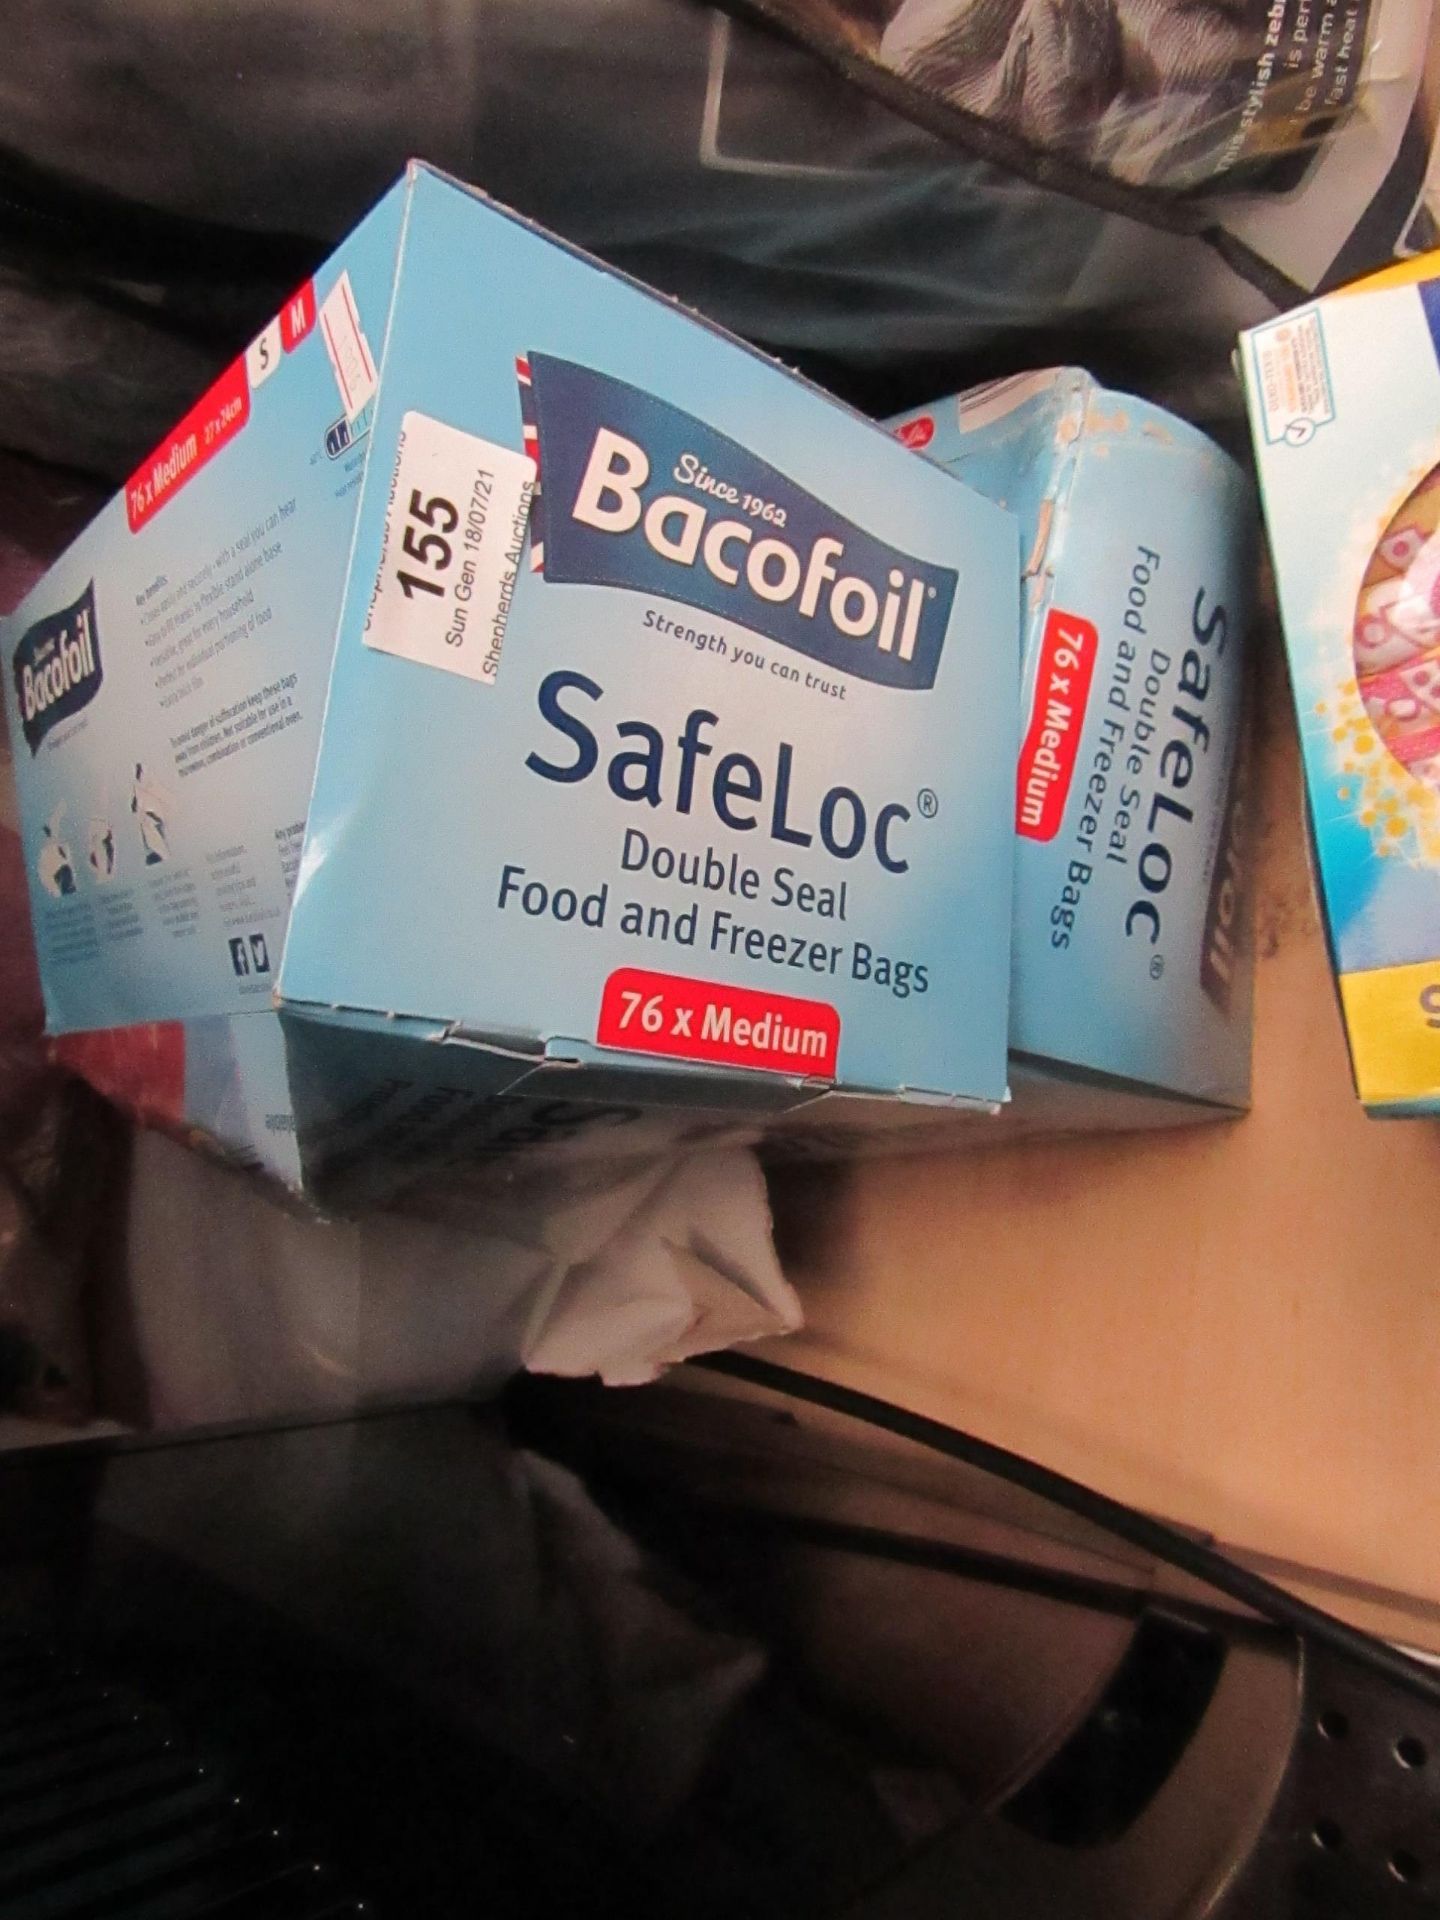 2x boxes of bacofoil safeloc double seal food bags - box is damaged some could be missing.